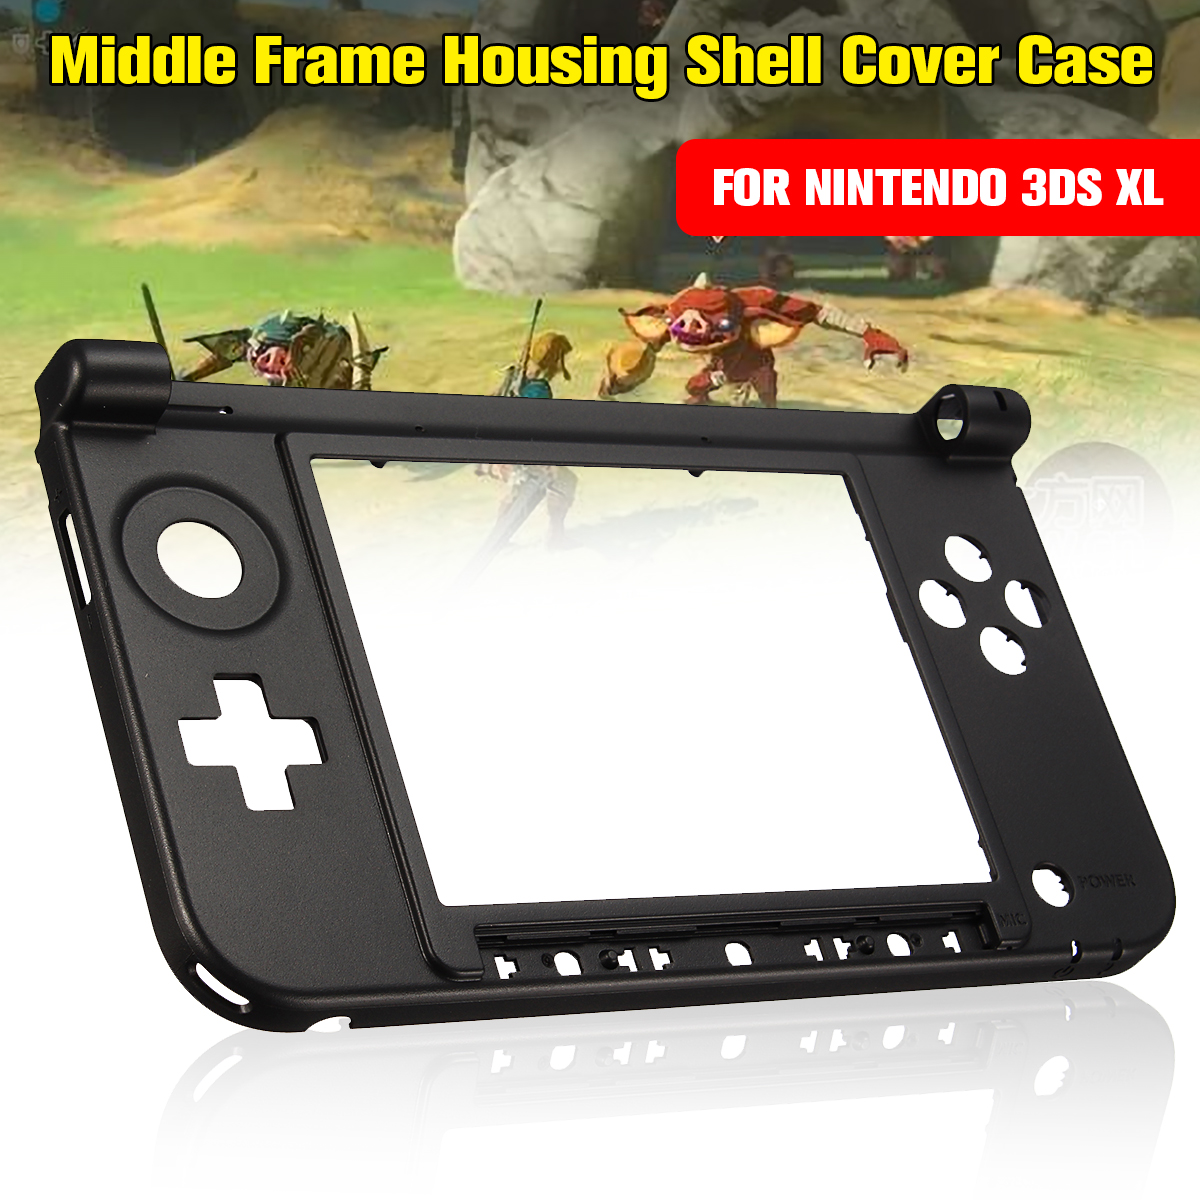 Replacement Bottom Middle Frame Housing Shell Cover Case for Nintendo 3DS XL 3DS LL Game Console 8